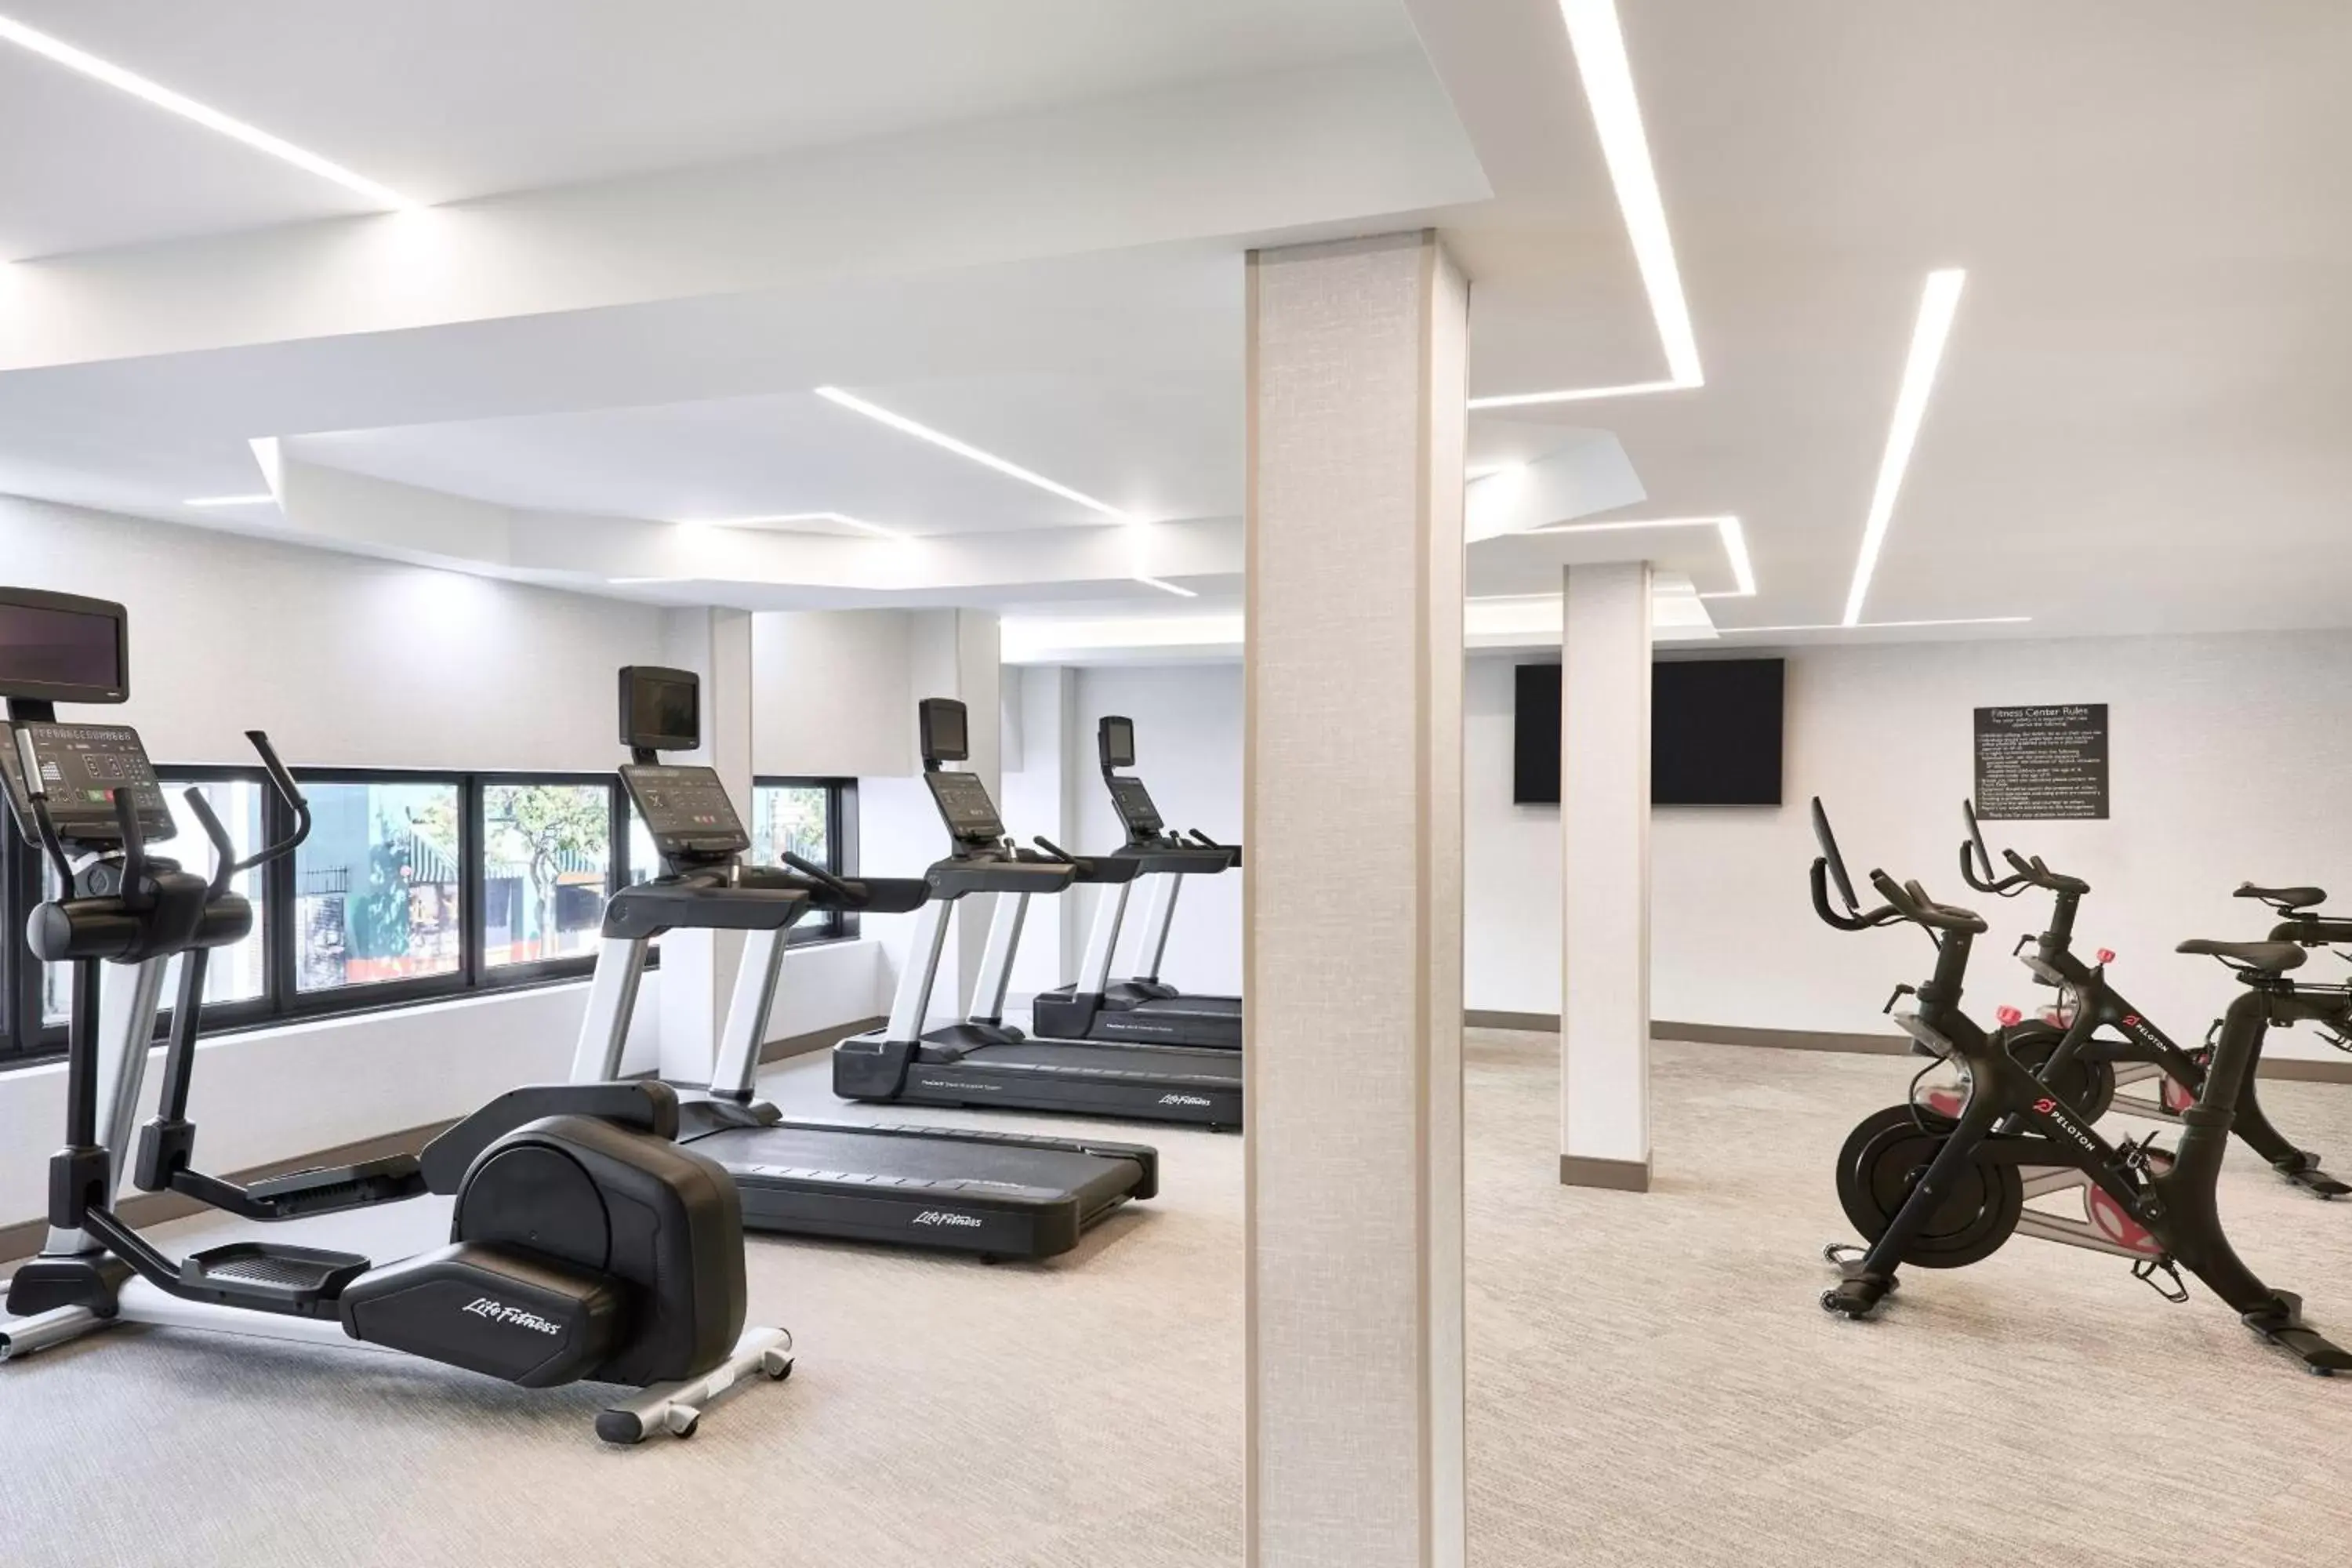 Fitness centre/facilities, Fitness Center/Facilities in AC Hotel by Marriott San Diego Downtown Gaslamp Quarter